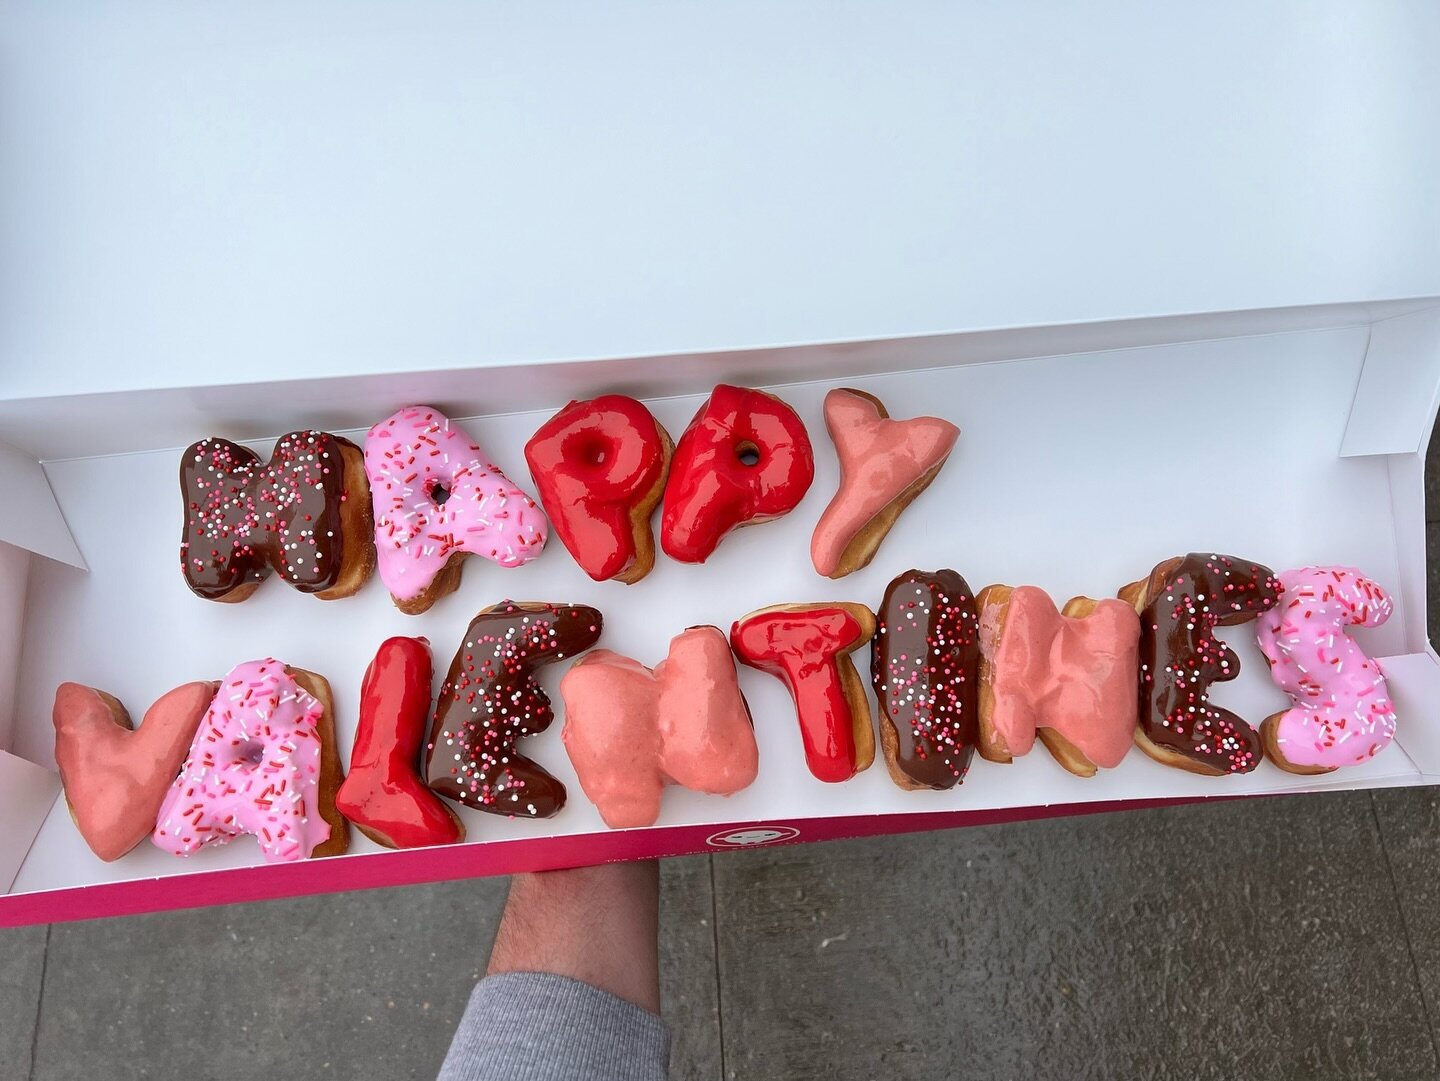 Just say it with donuts 💕 (it&rsquo;s so much easier 😅)

Valentine&rsquo;s Day letterboxes are back by popular demand - order online for pickup on February 14th from our Brewery location! 🍻

Featuring strawberry, raspberry, chocolate and pink vani